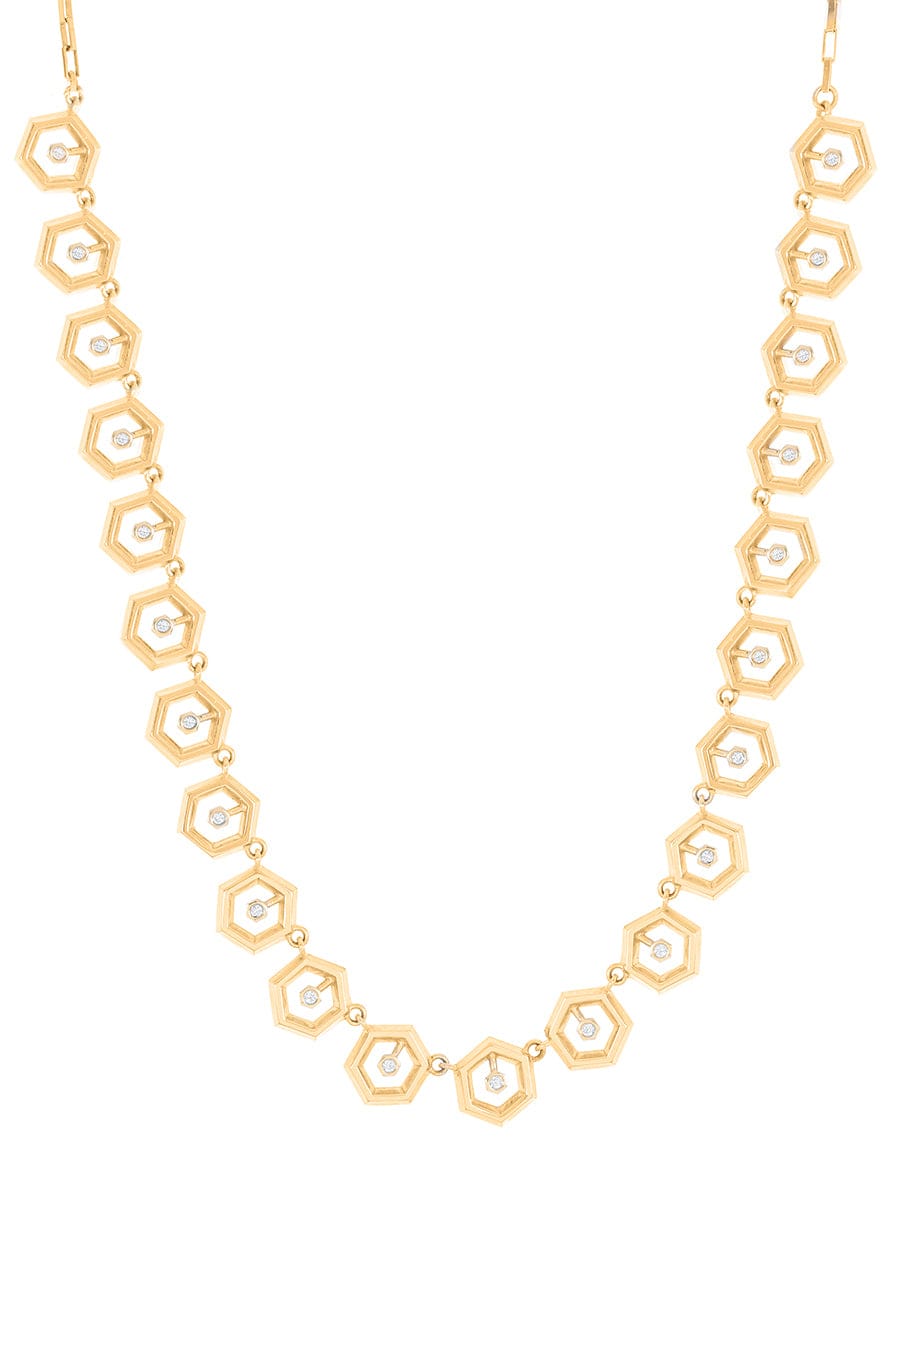 STEPHANIE ANDERS XO-'Eleven Eleven' Necklace-YELLOW GOLD